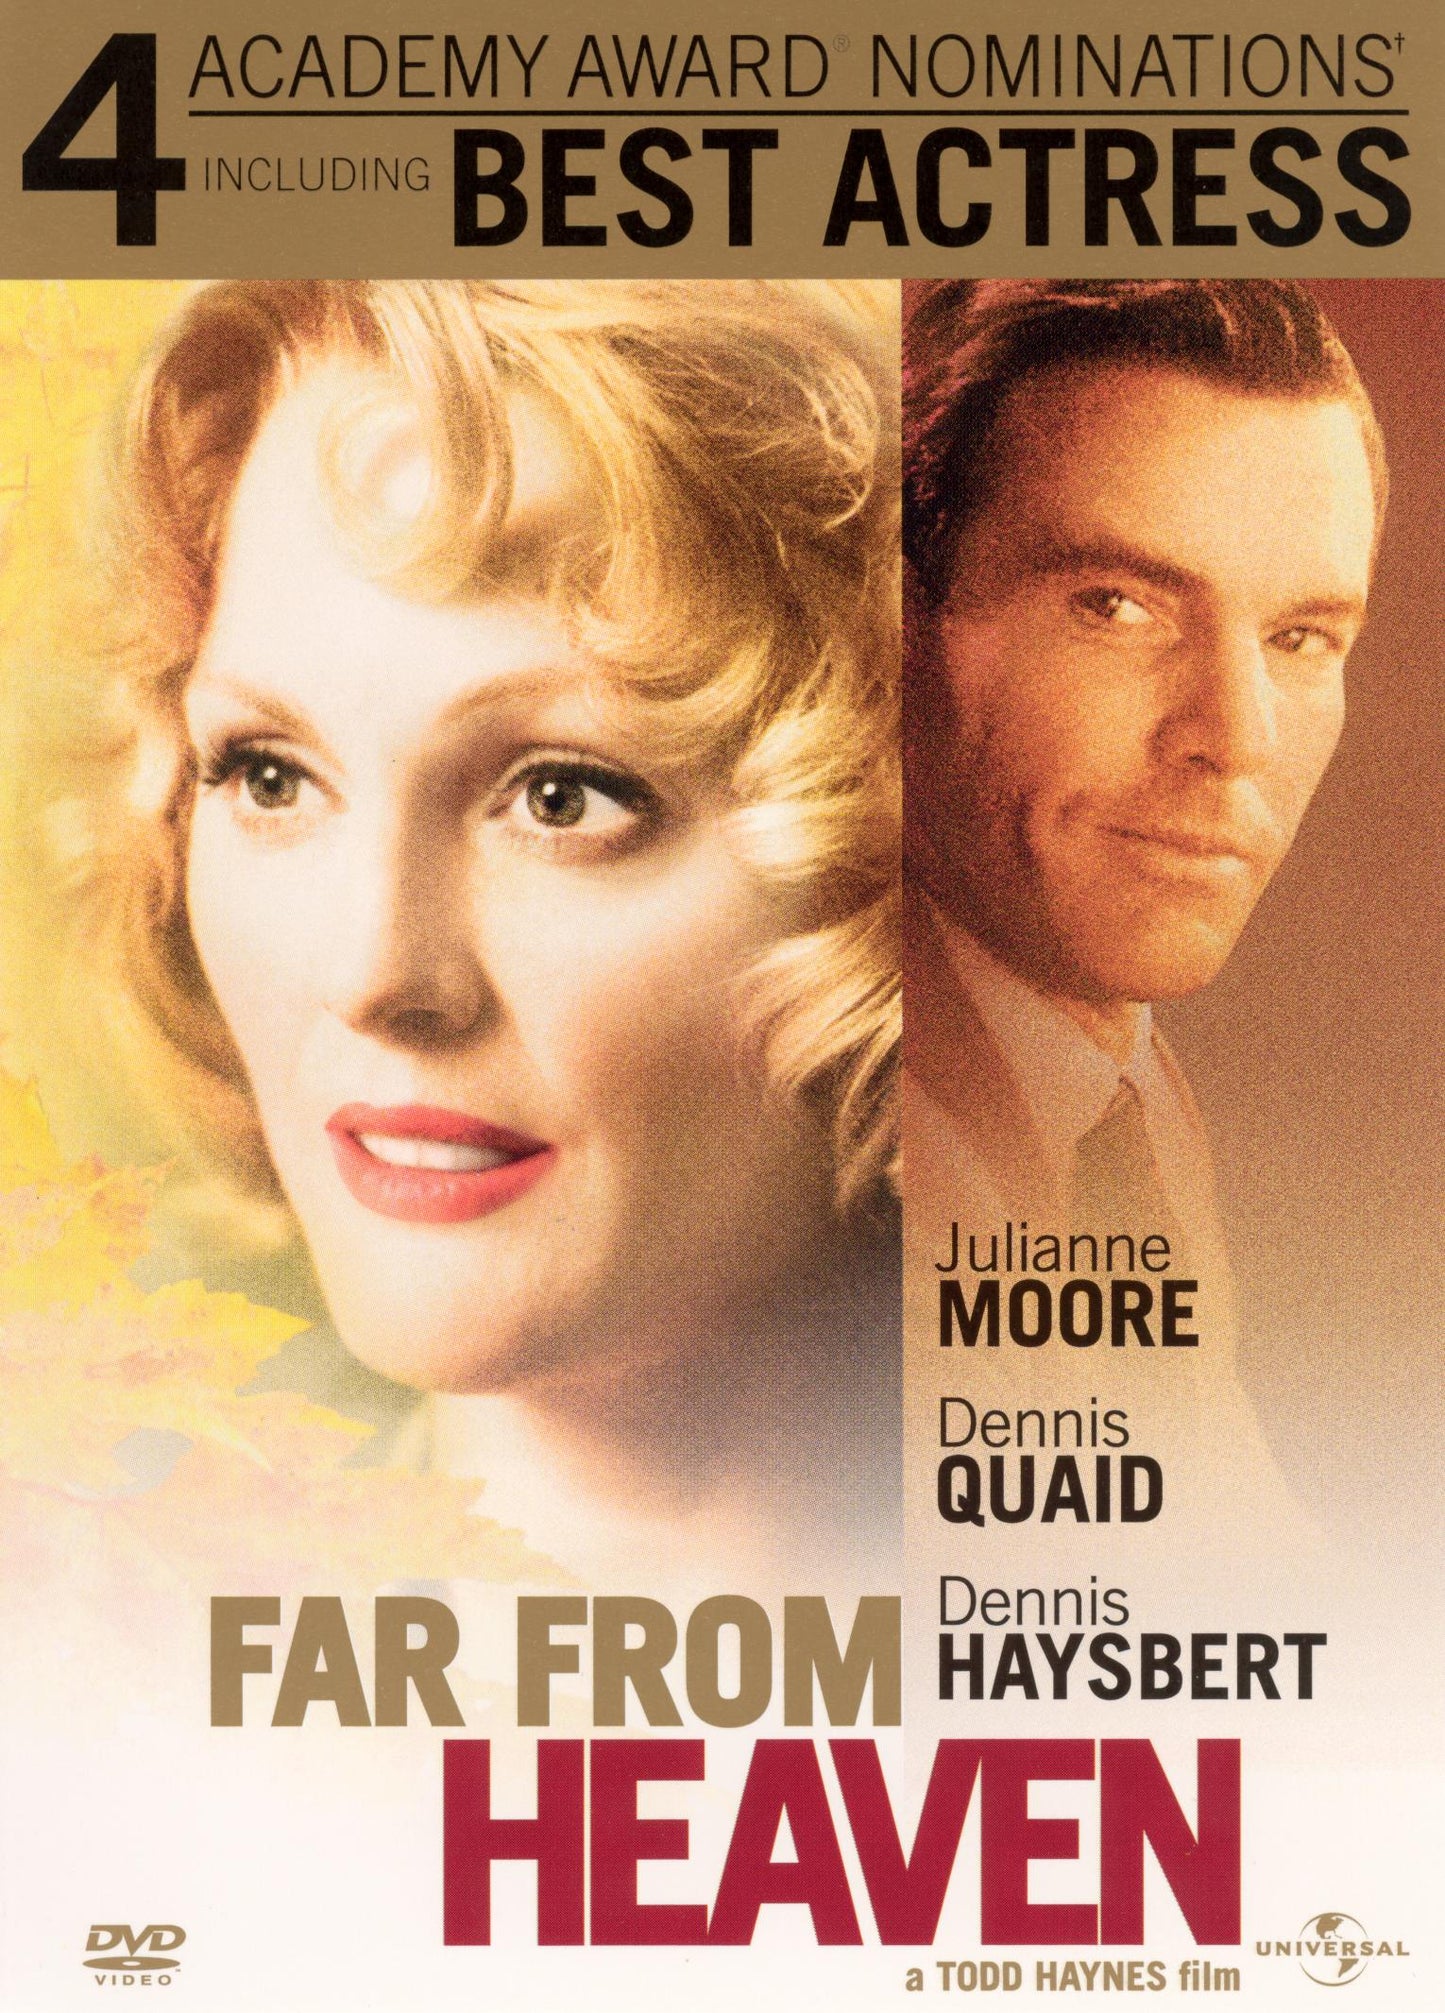 Far From Heaven (USA Import) cover art